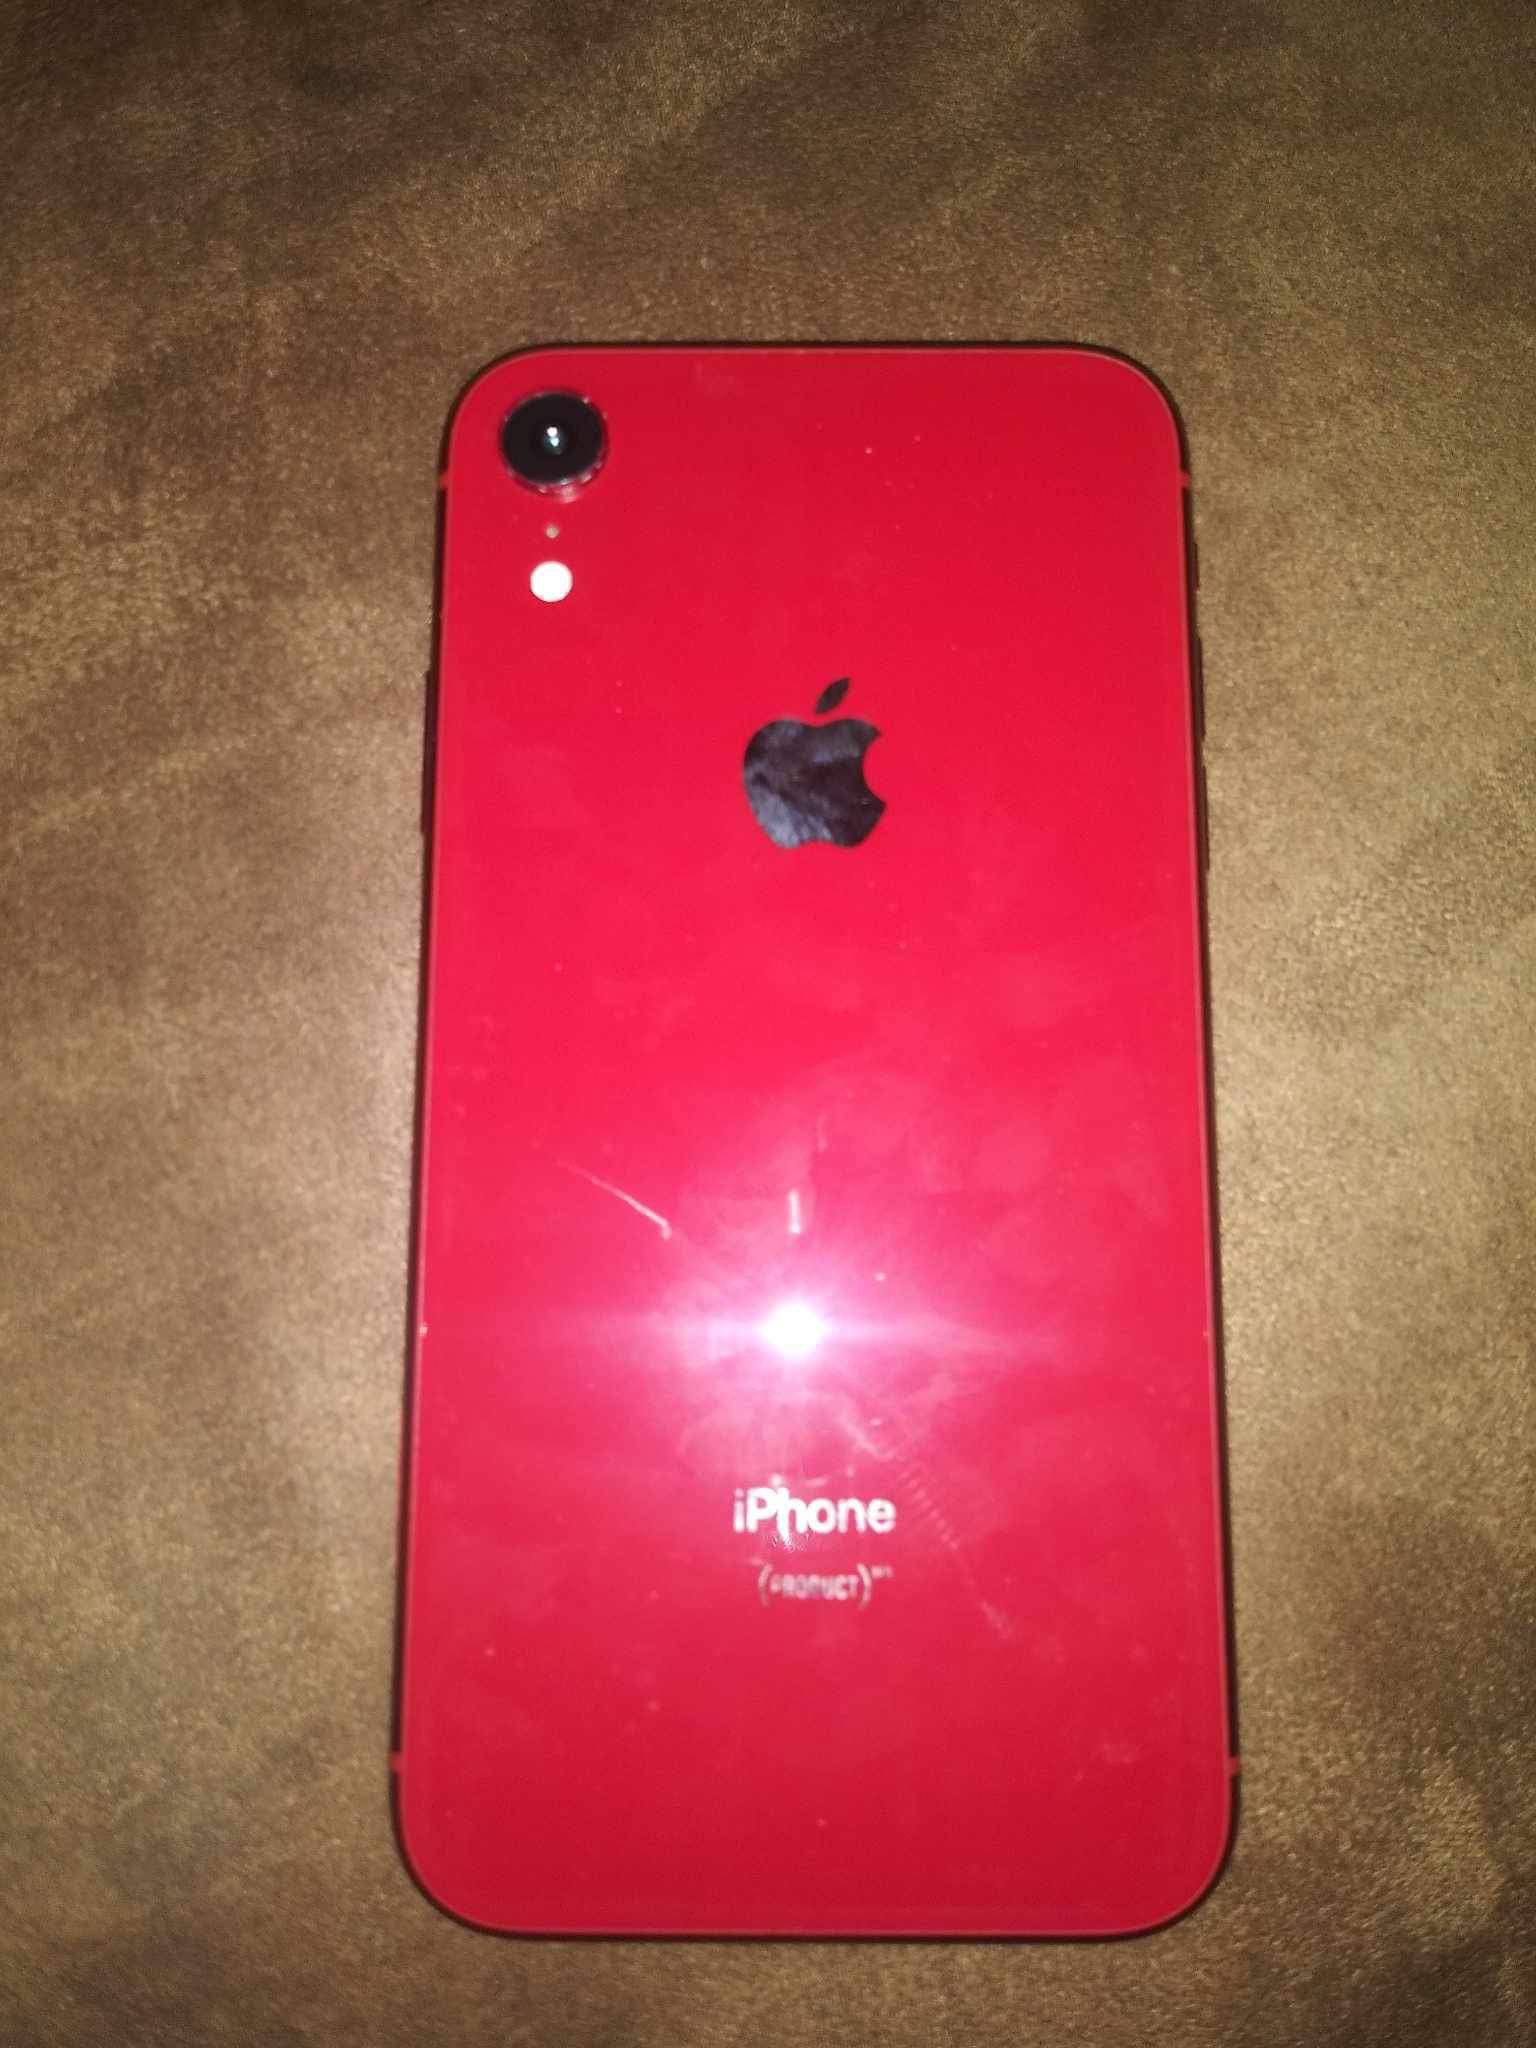 iPhone Xr 128GB Fully Unlocked Comes With Accessories